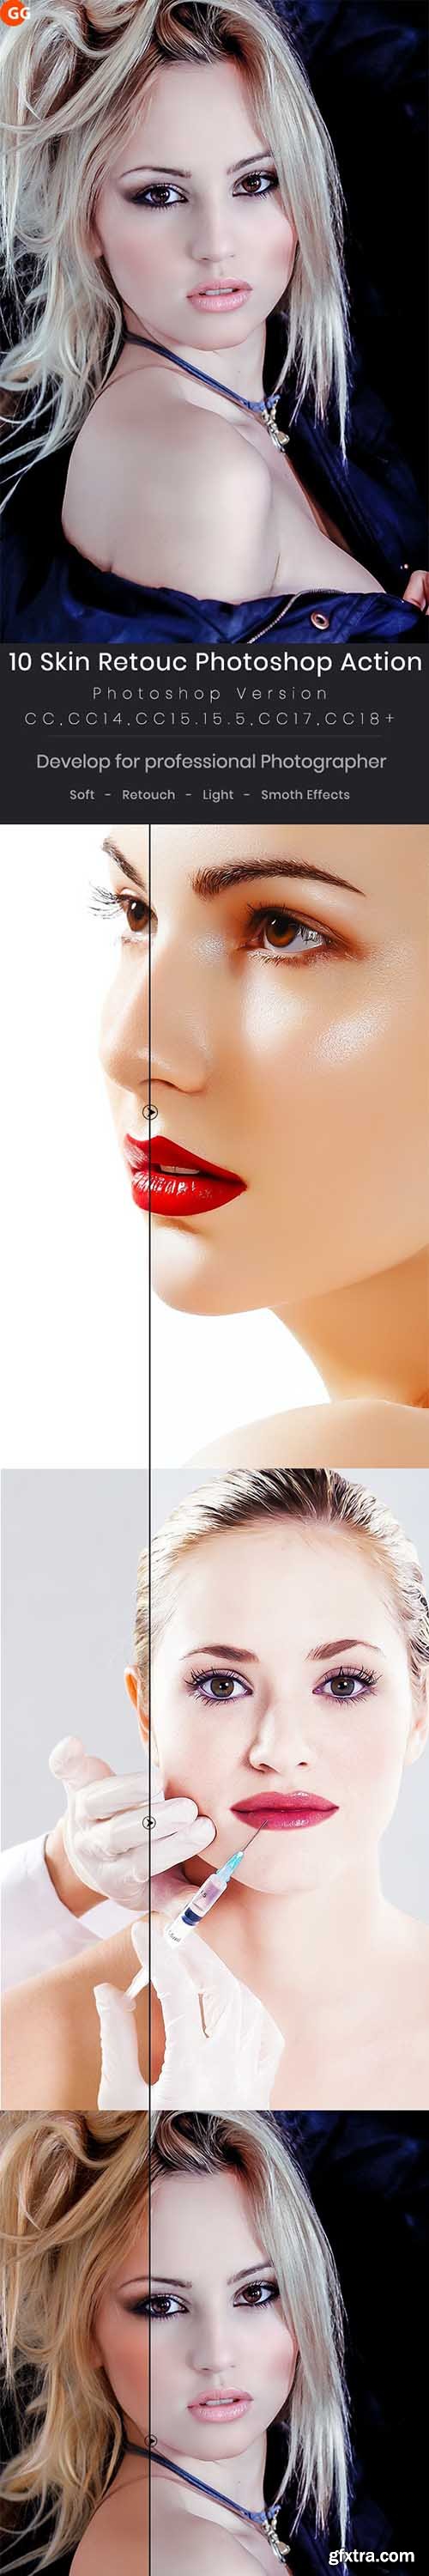 GraphicRiver - 10 Skin Retouch Photoshop Action 21648340